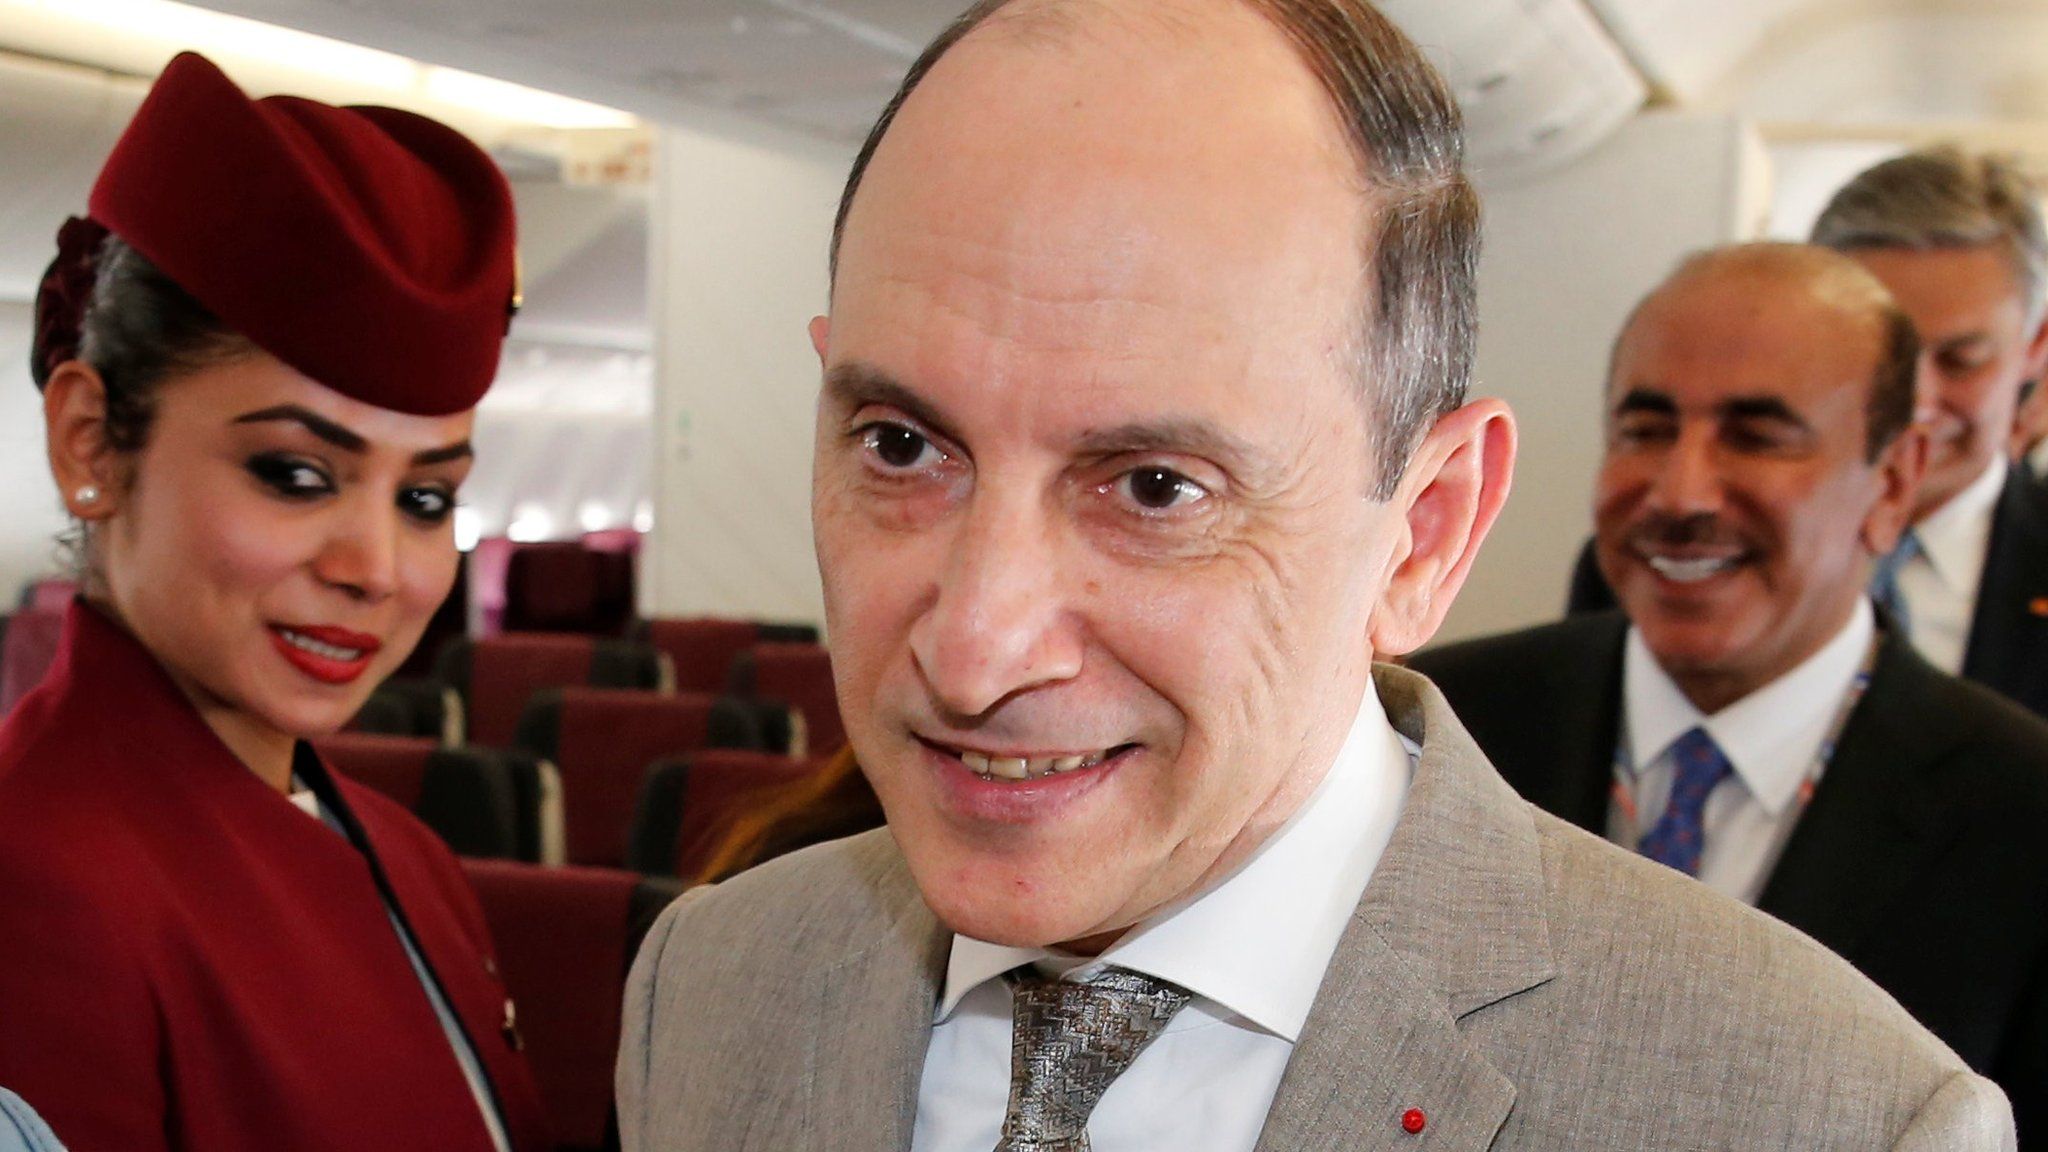 Qatar Airways Chief Executive Officer Akbar Al Baker is seen during the 52nd Paris Air Show at Le Bourget airport (19 June 2017)